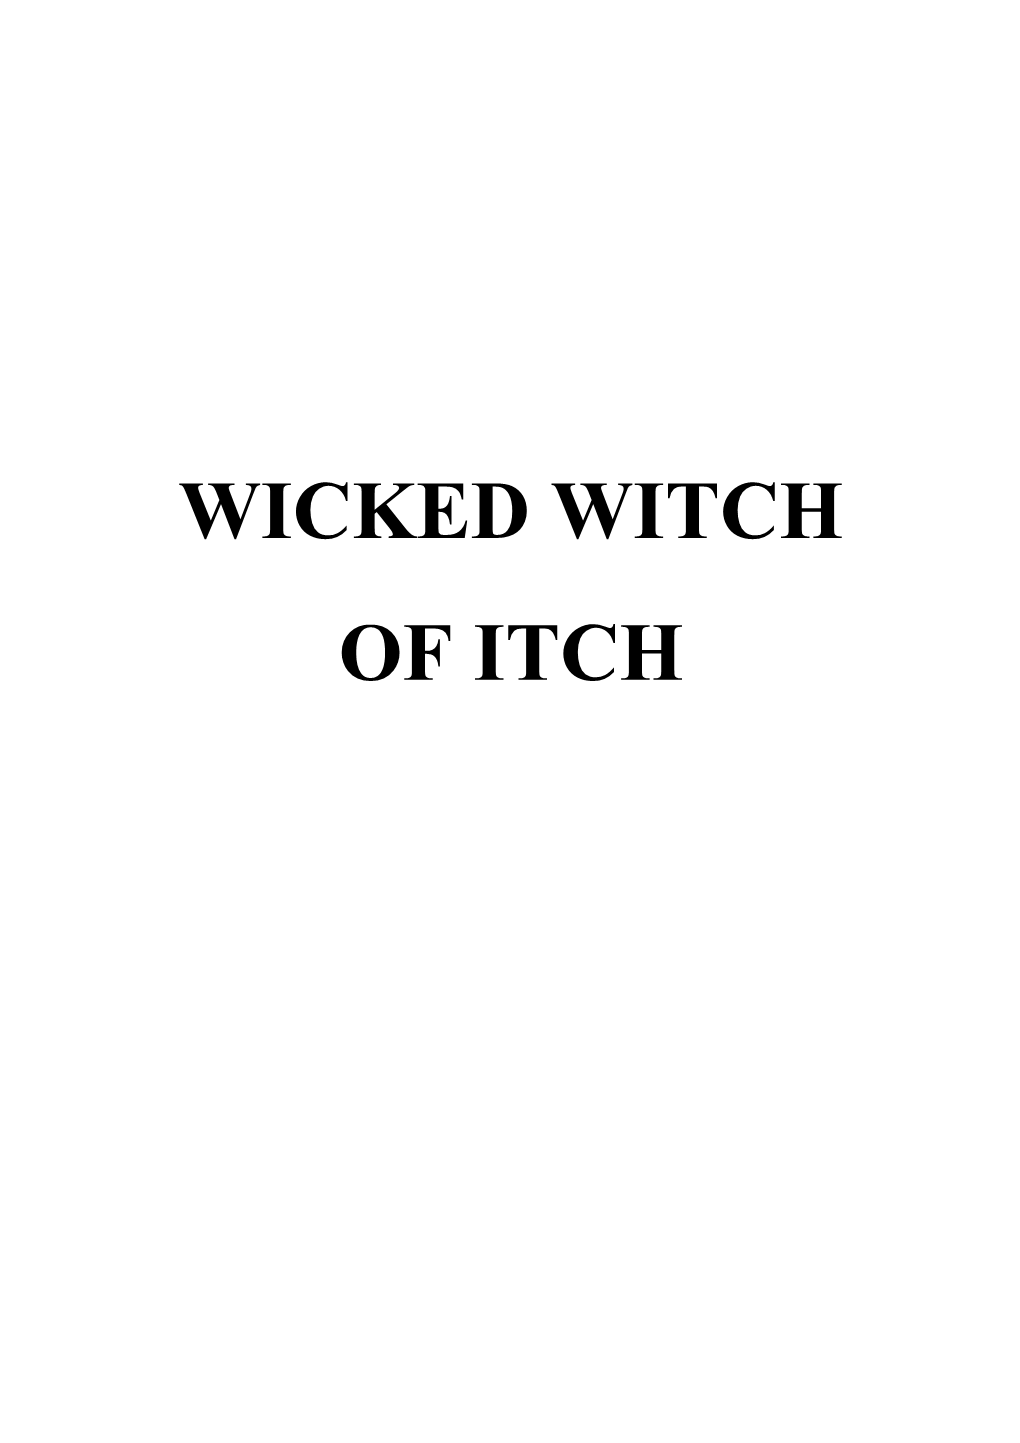 Wicked Witch of Itch